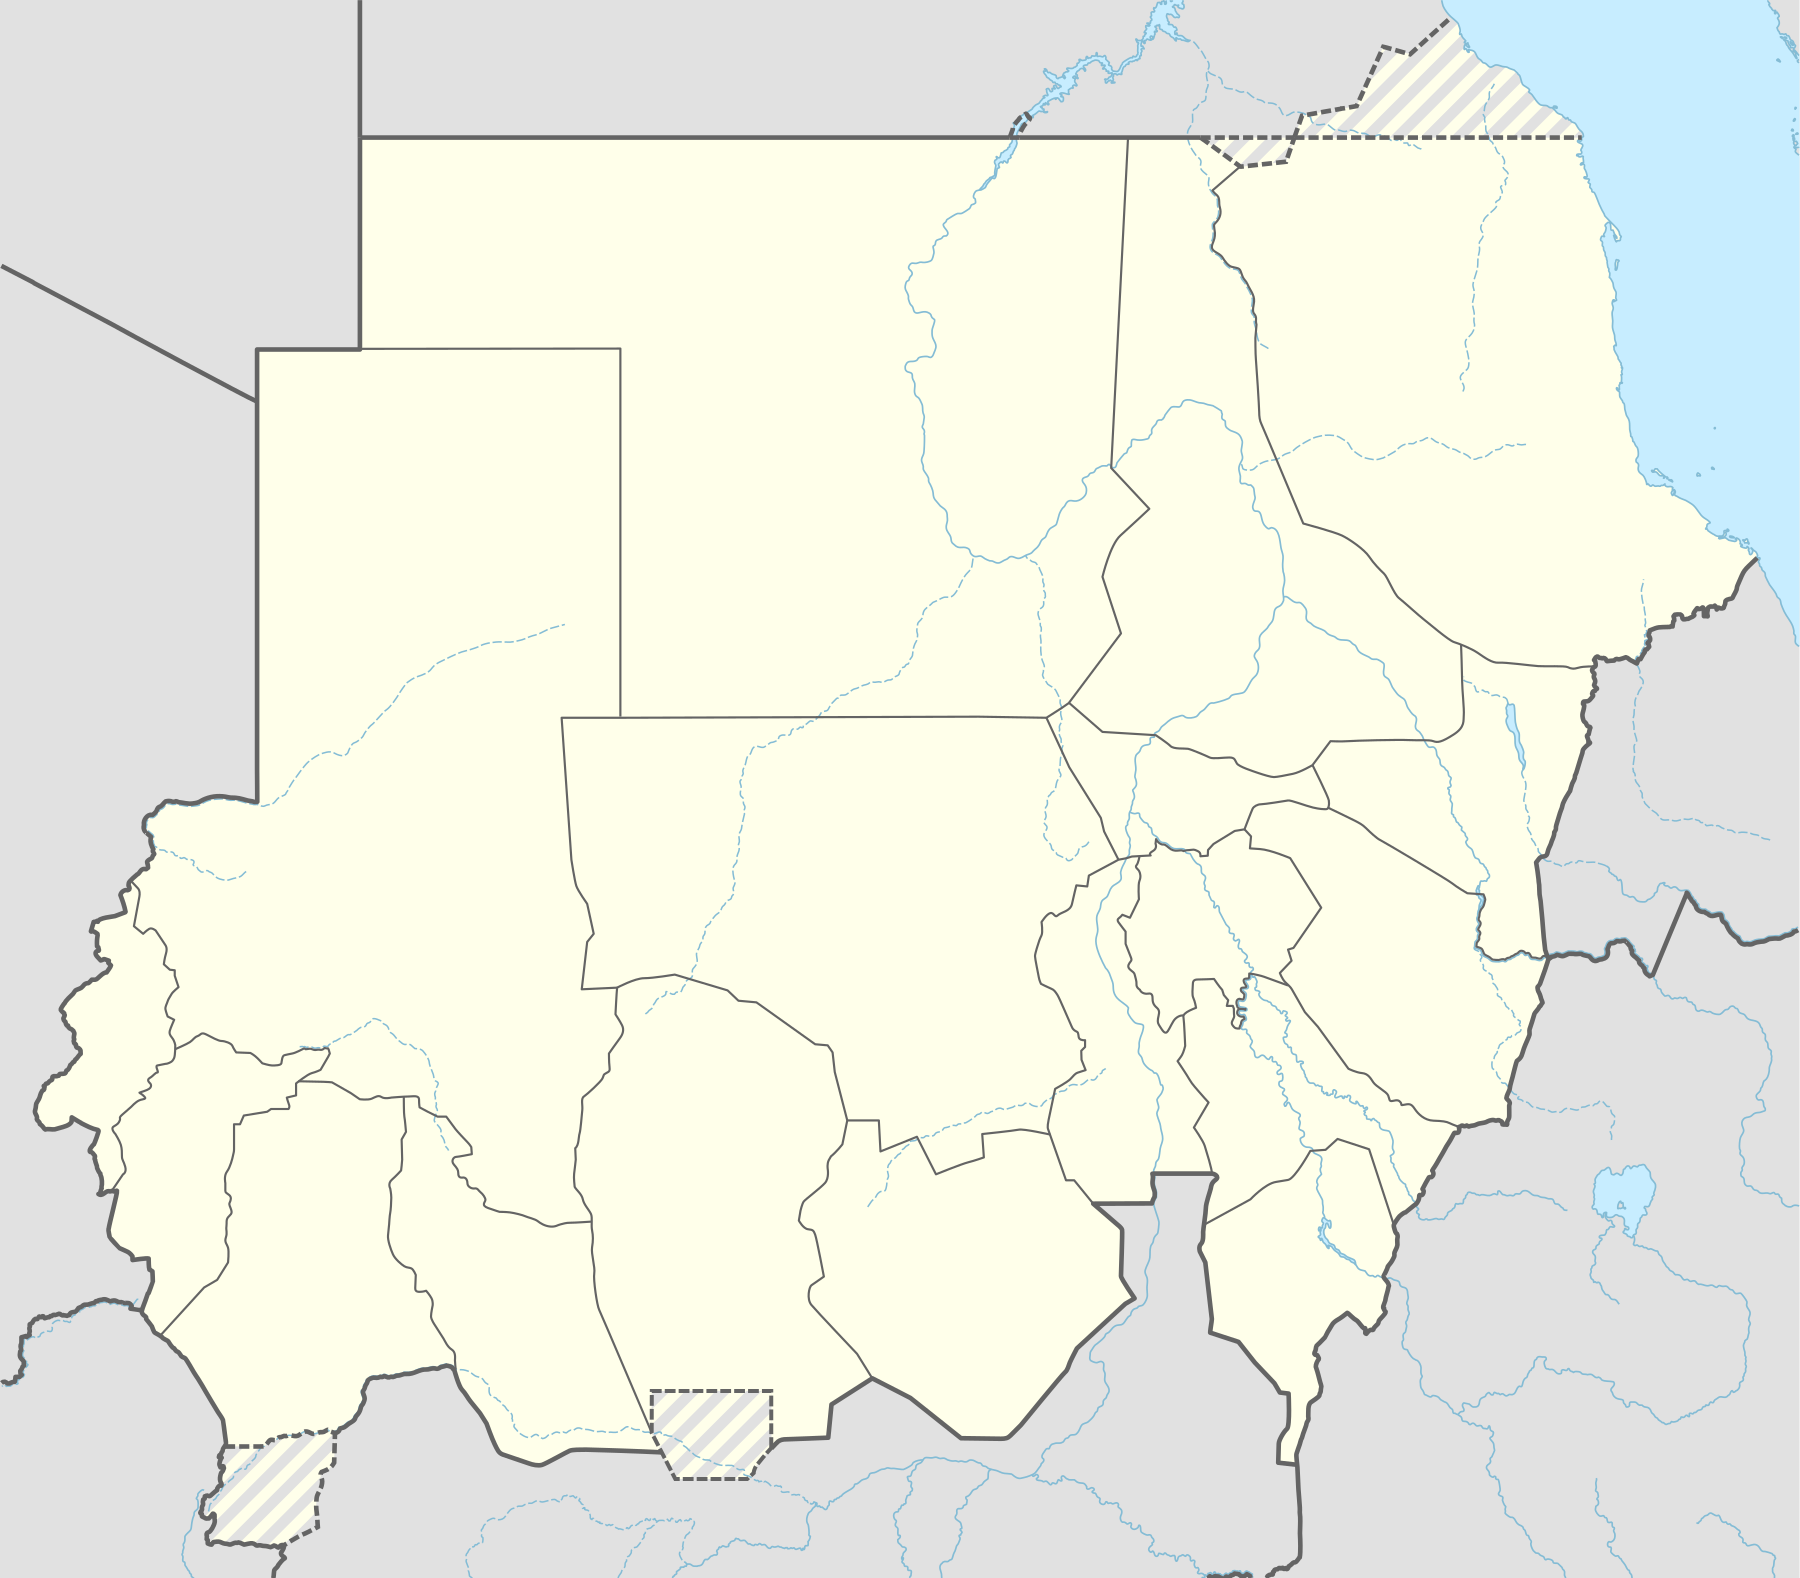 Sudanese Internal Conflict detailed map is located in Sudan